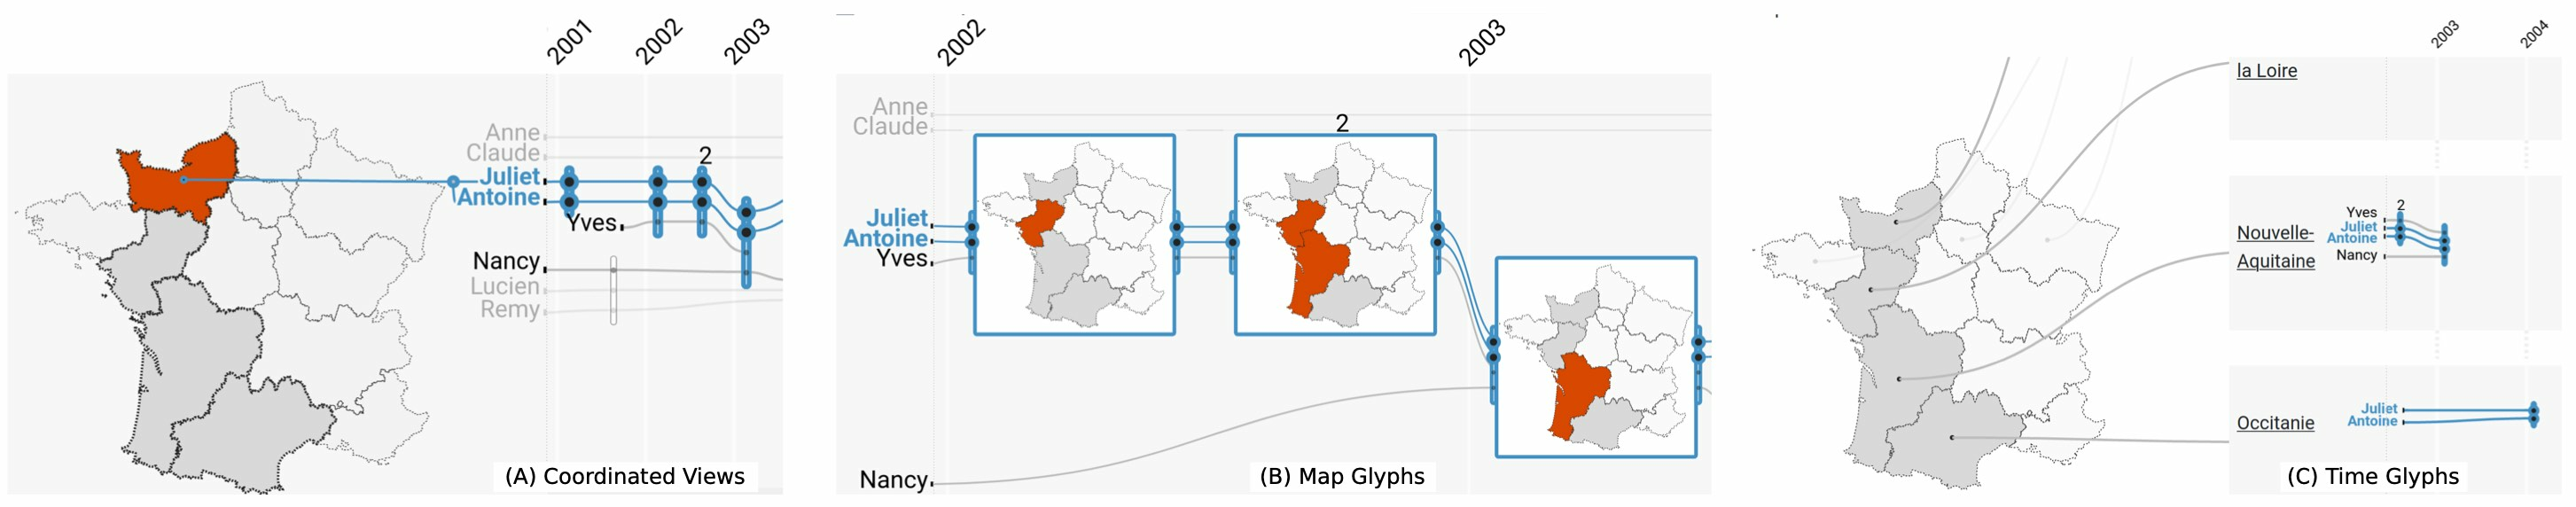 Three screenshots showing the different ways to integrate maps into storyline visualizations, using French regions as an example.